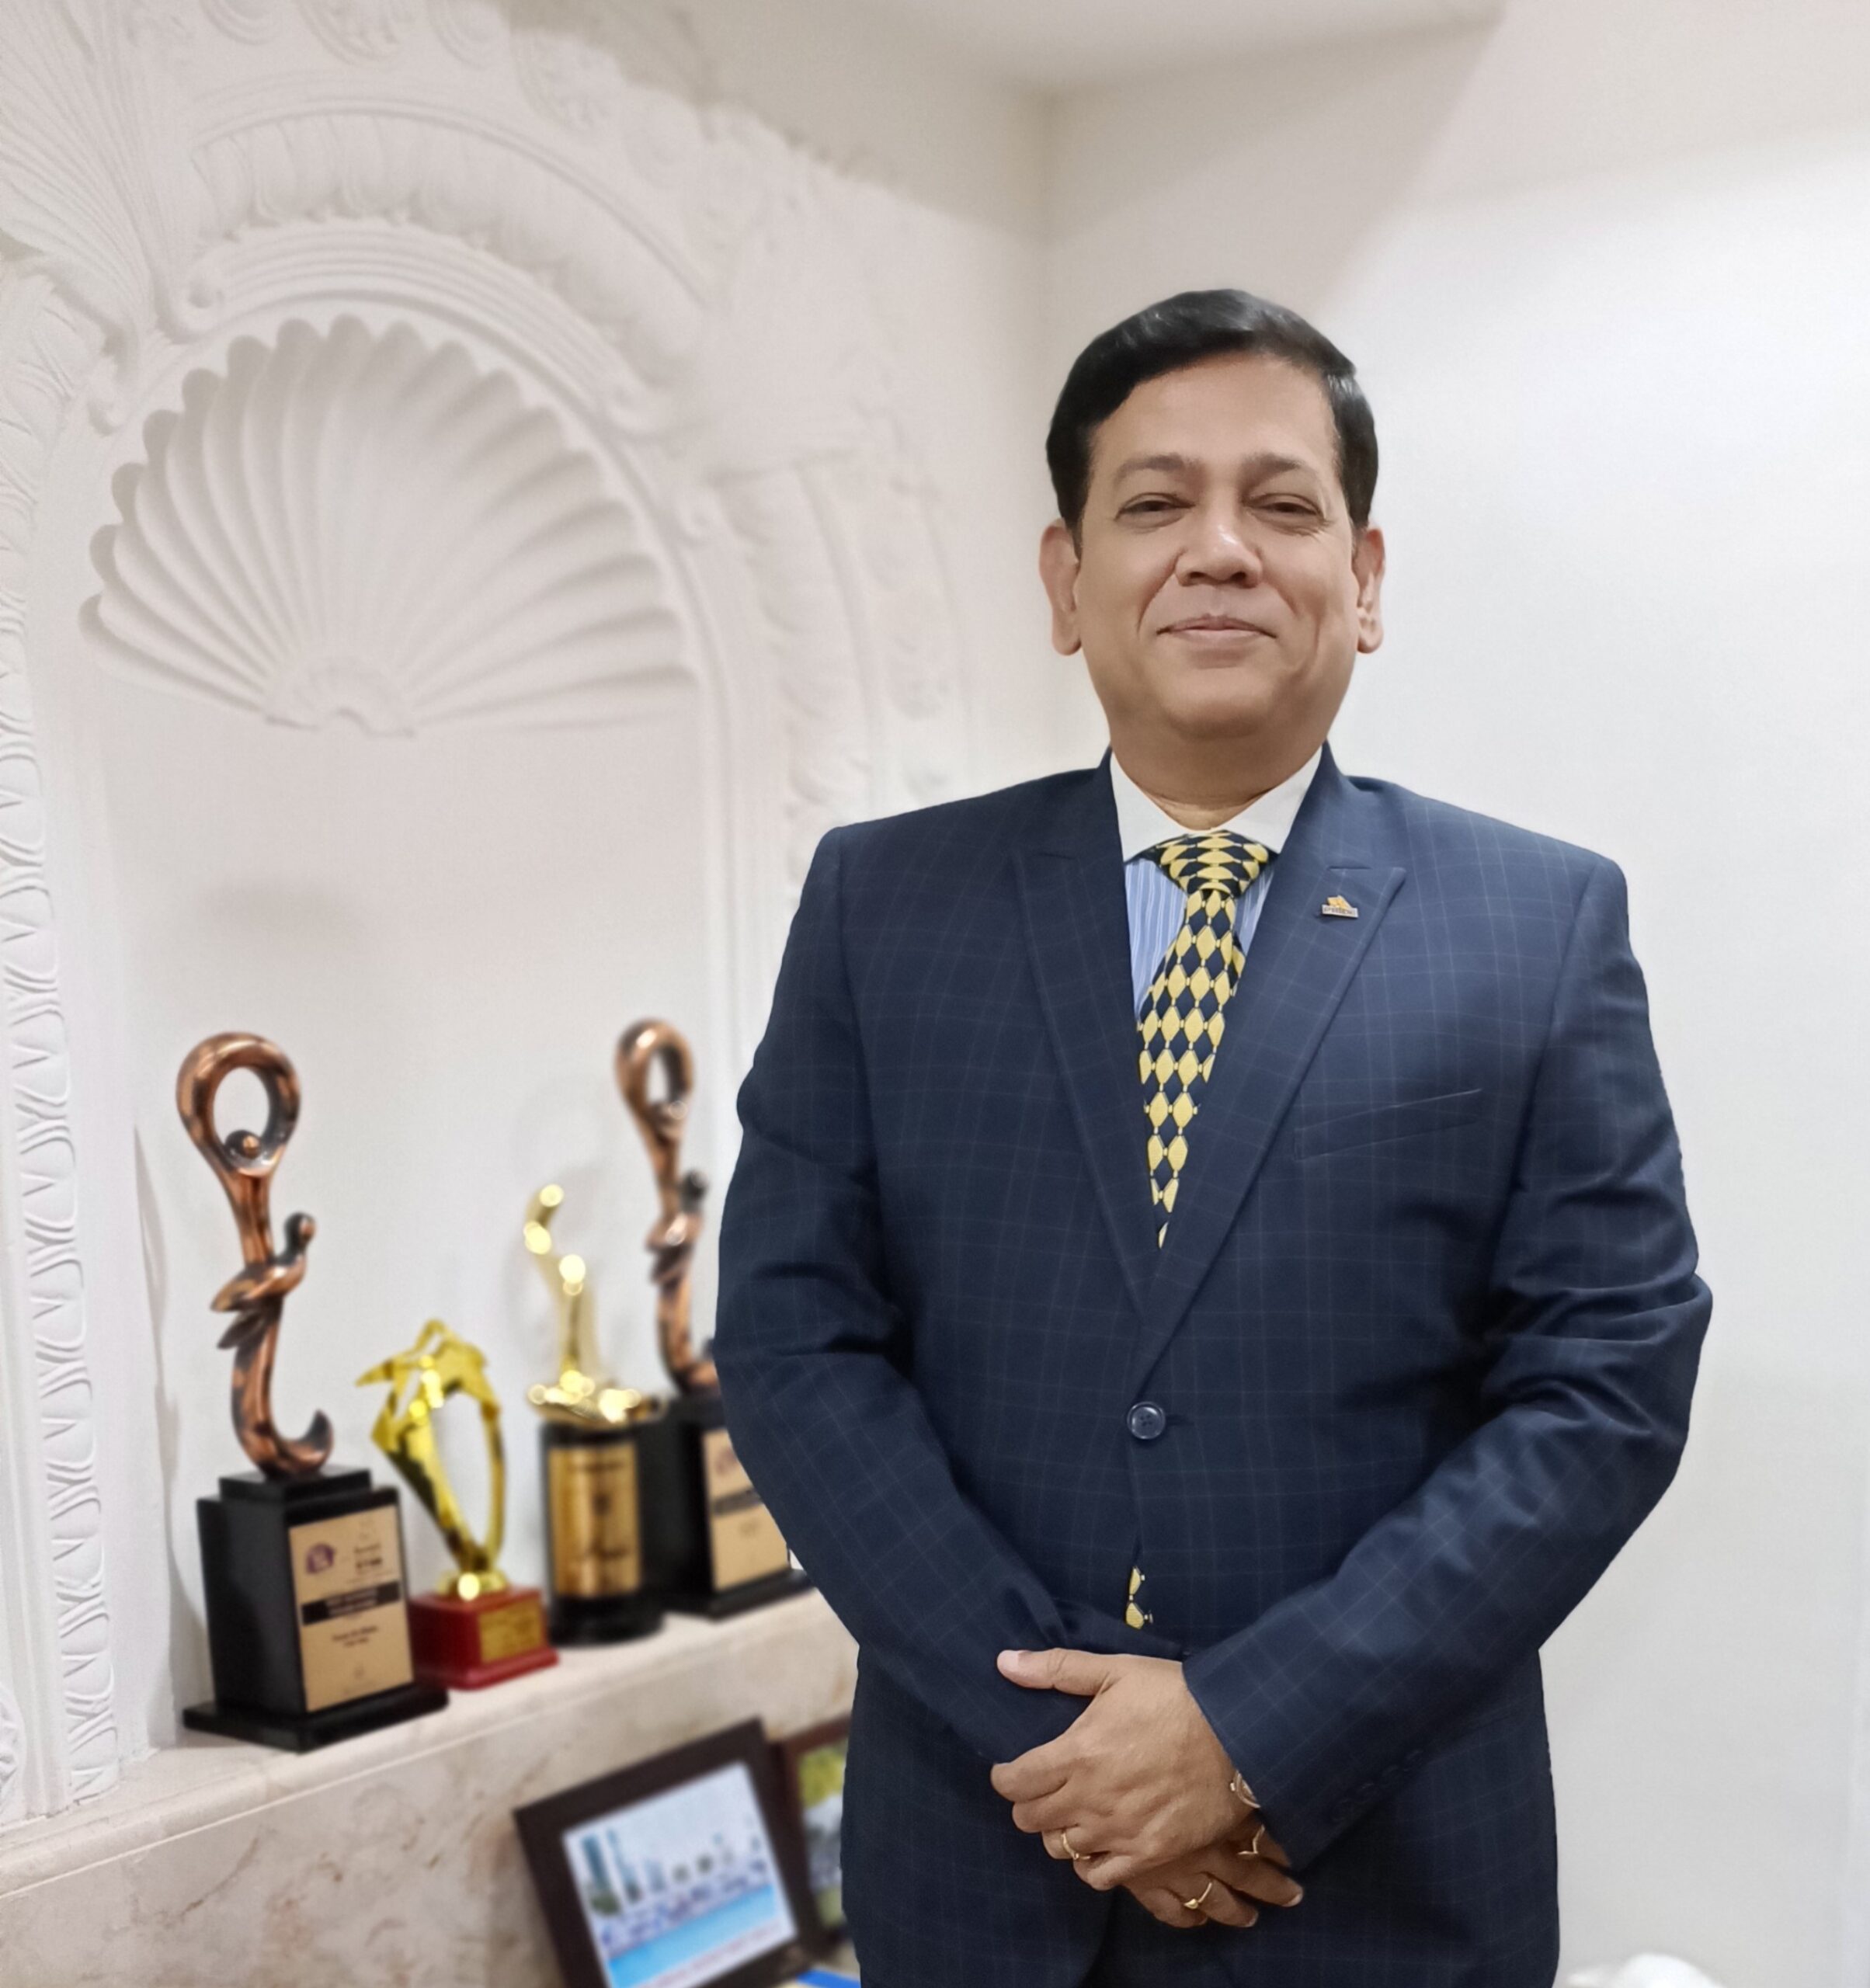 Pride Hotels to expand its presence in North India